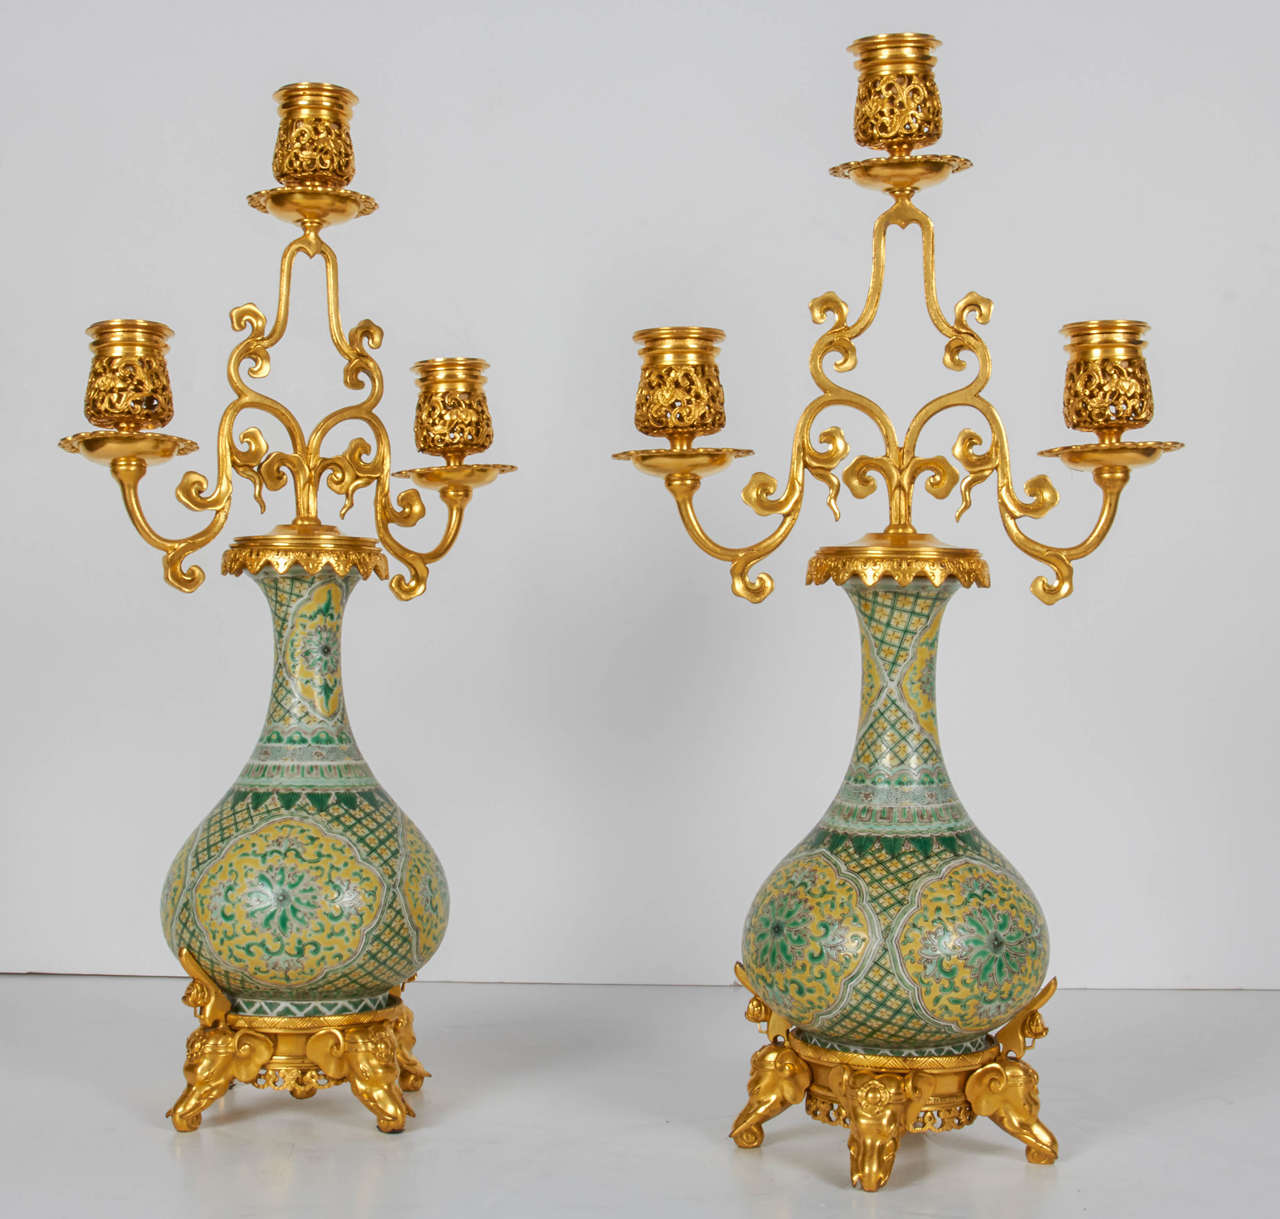 A very unusual pair of antique French doré bronze and Chinese Export porcelain, orientalist style, three-light candelabra designed by the outmost renowned French orientalist designer; Edouard Lievre, and finely executed by Ferdinand